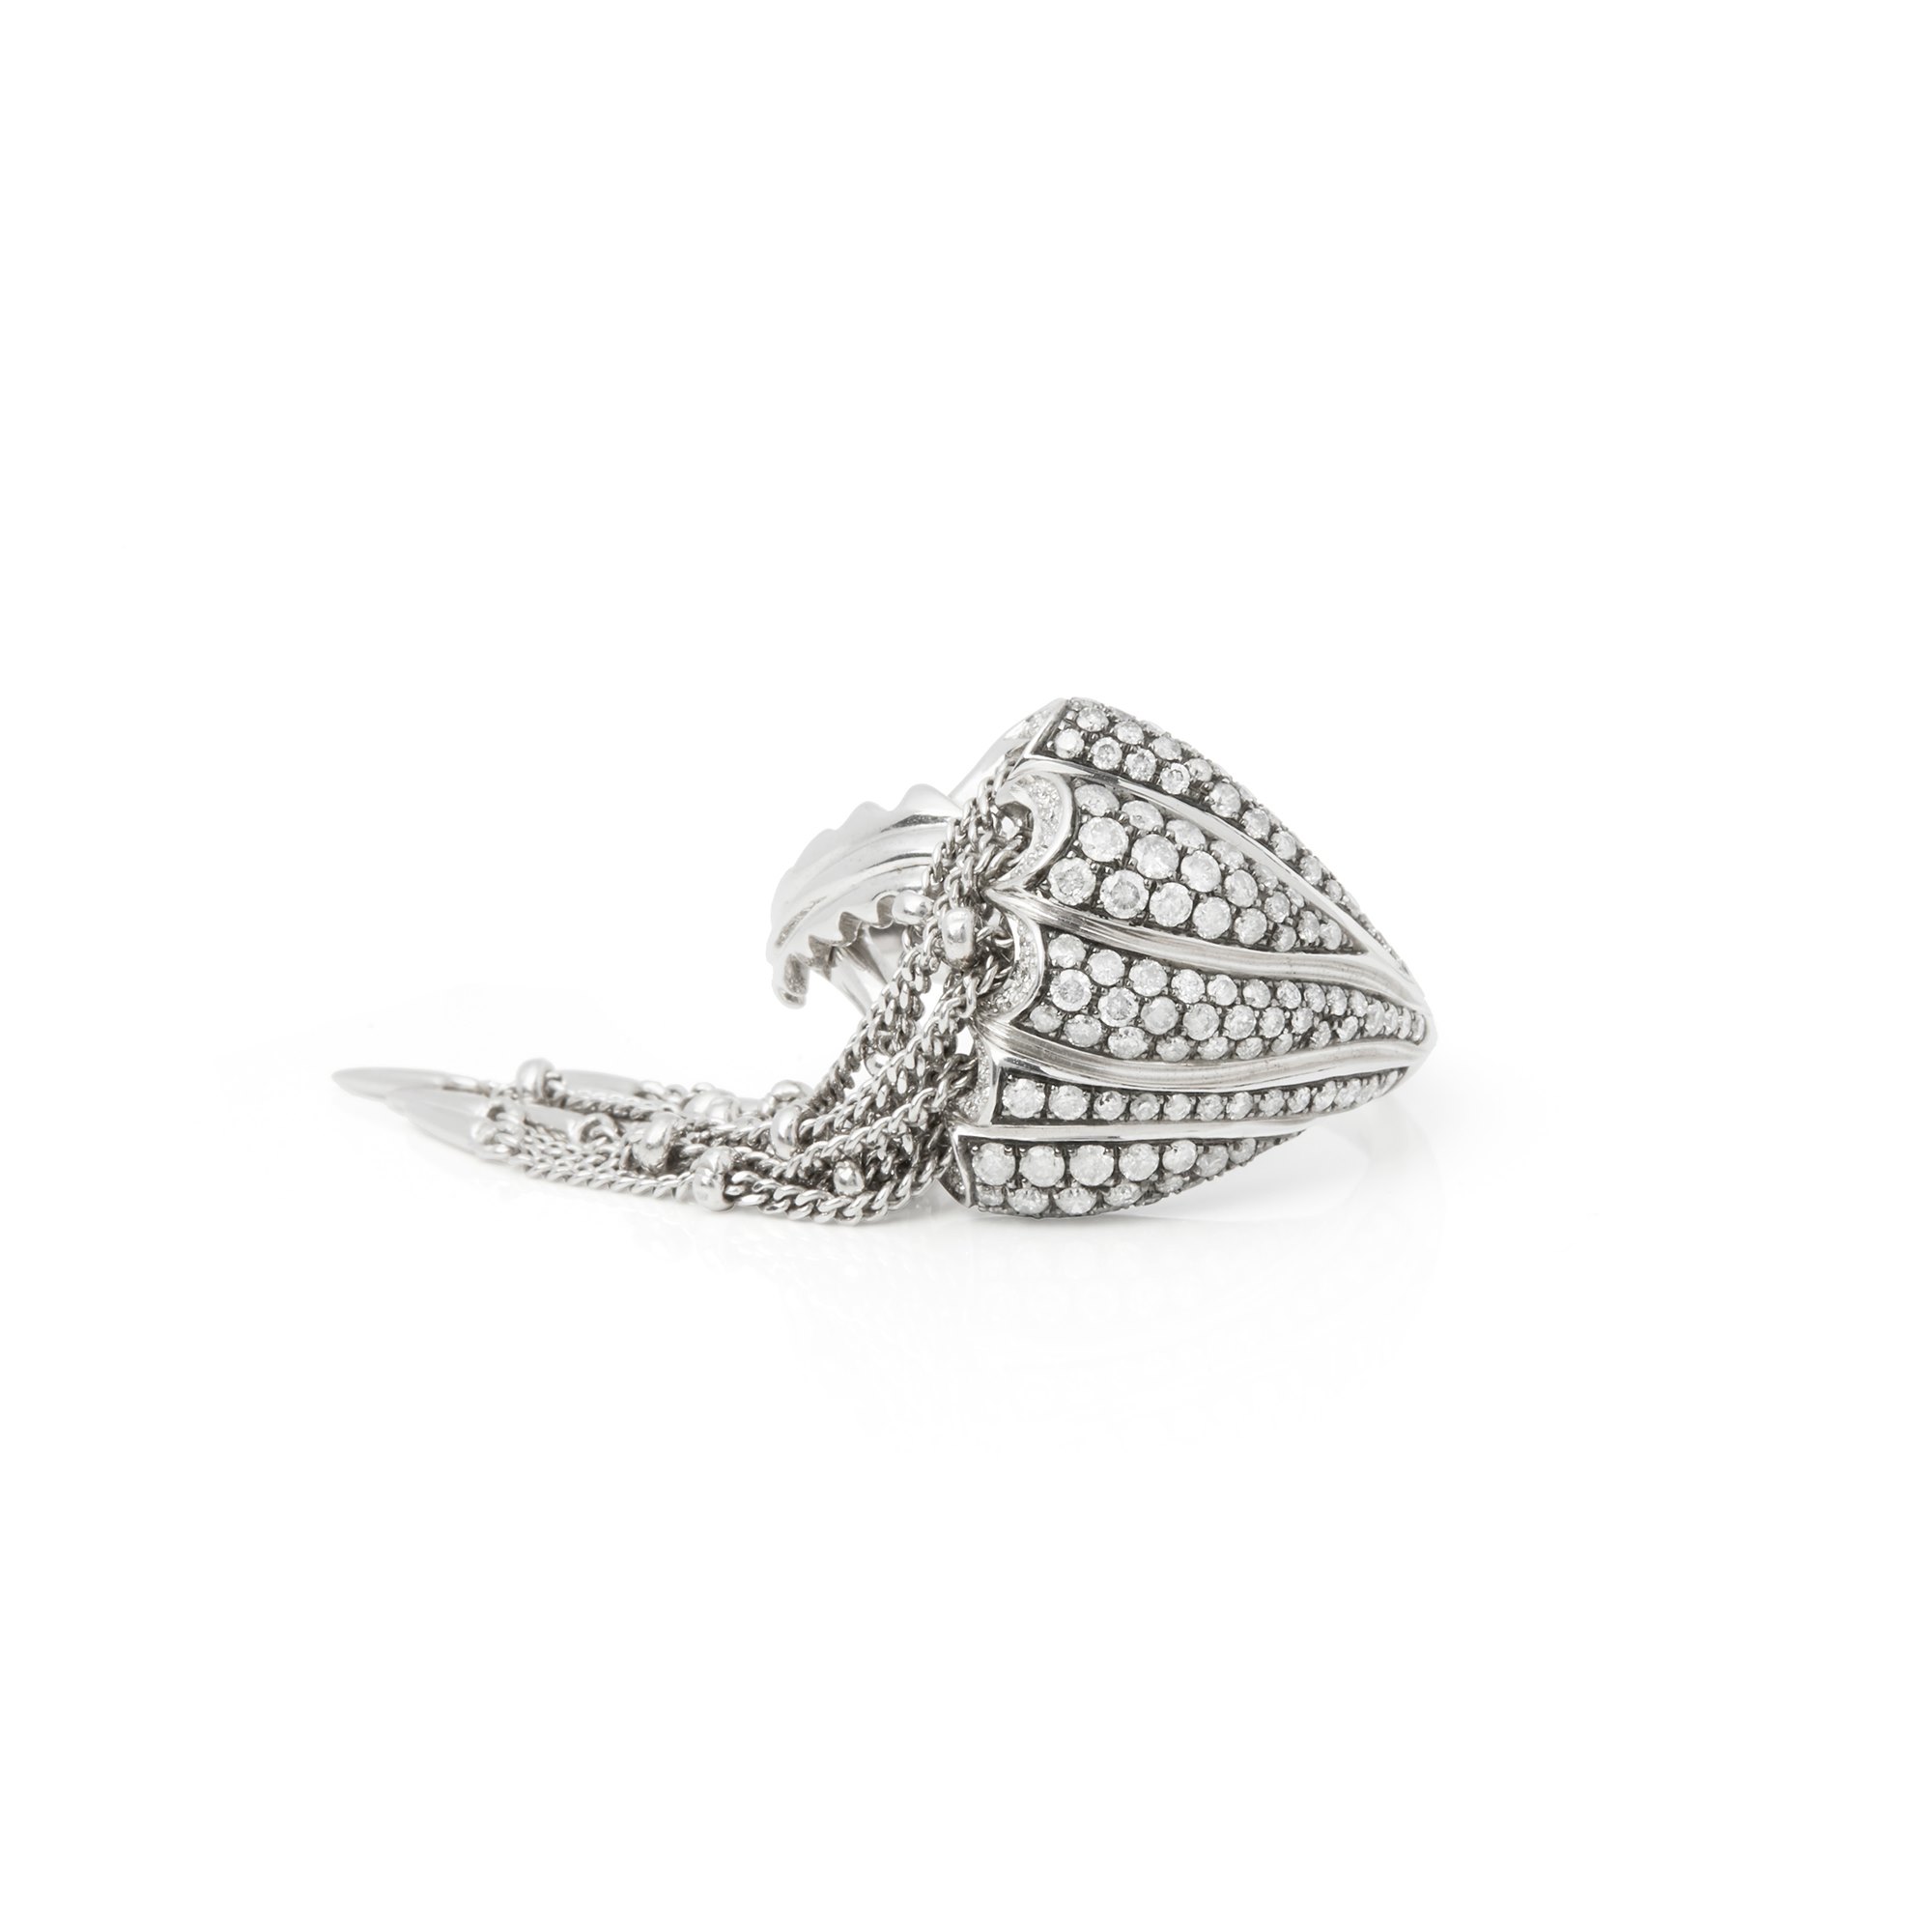 Stephen Webster Jewels Verne 18ct White Gold Jelly Fish Diamond Ring